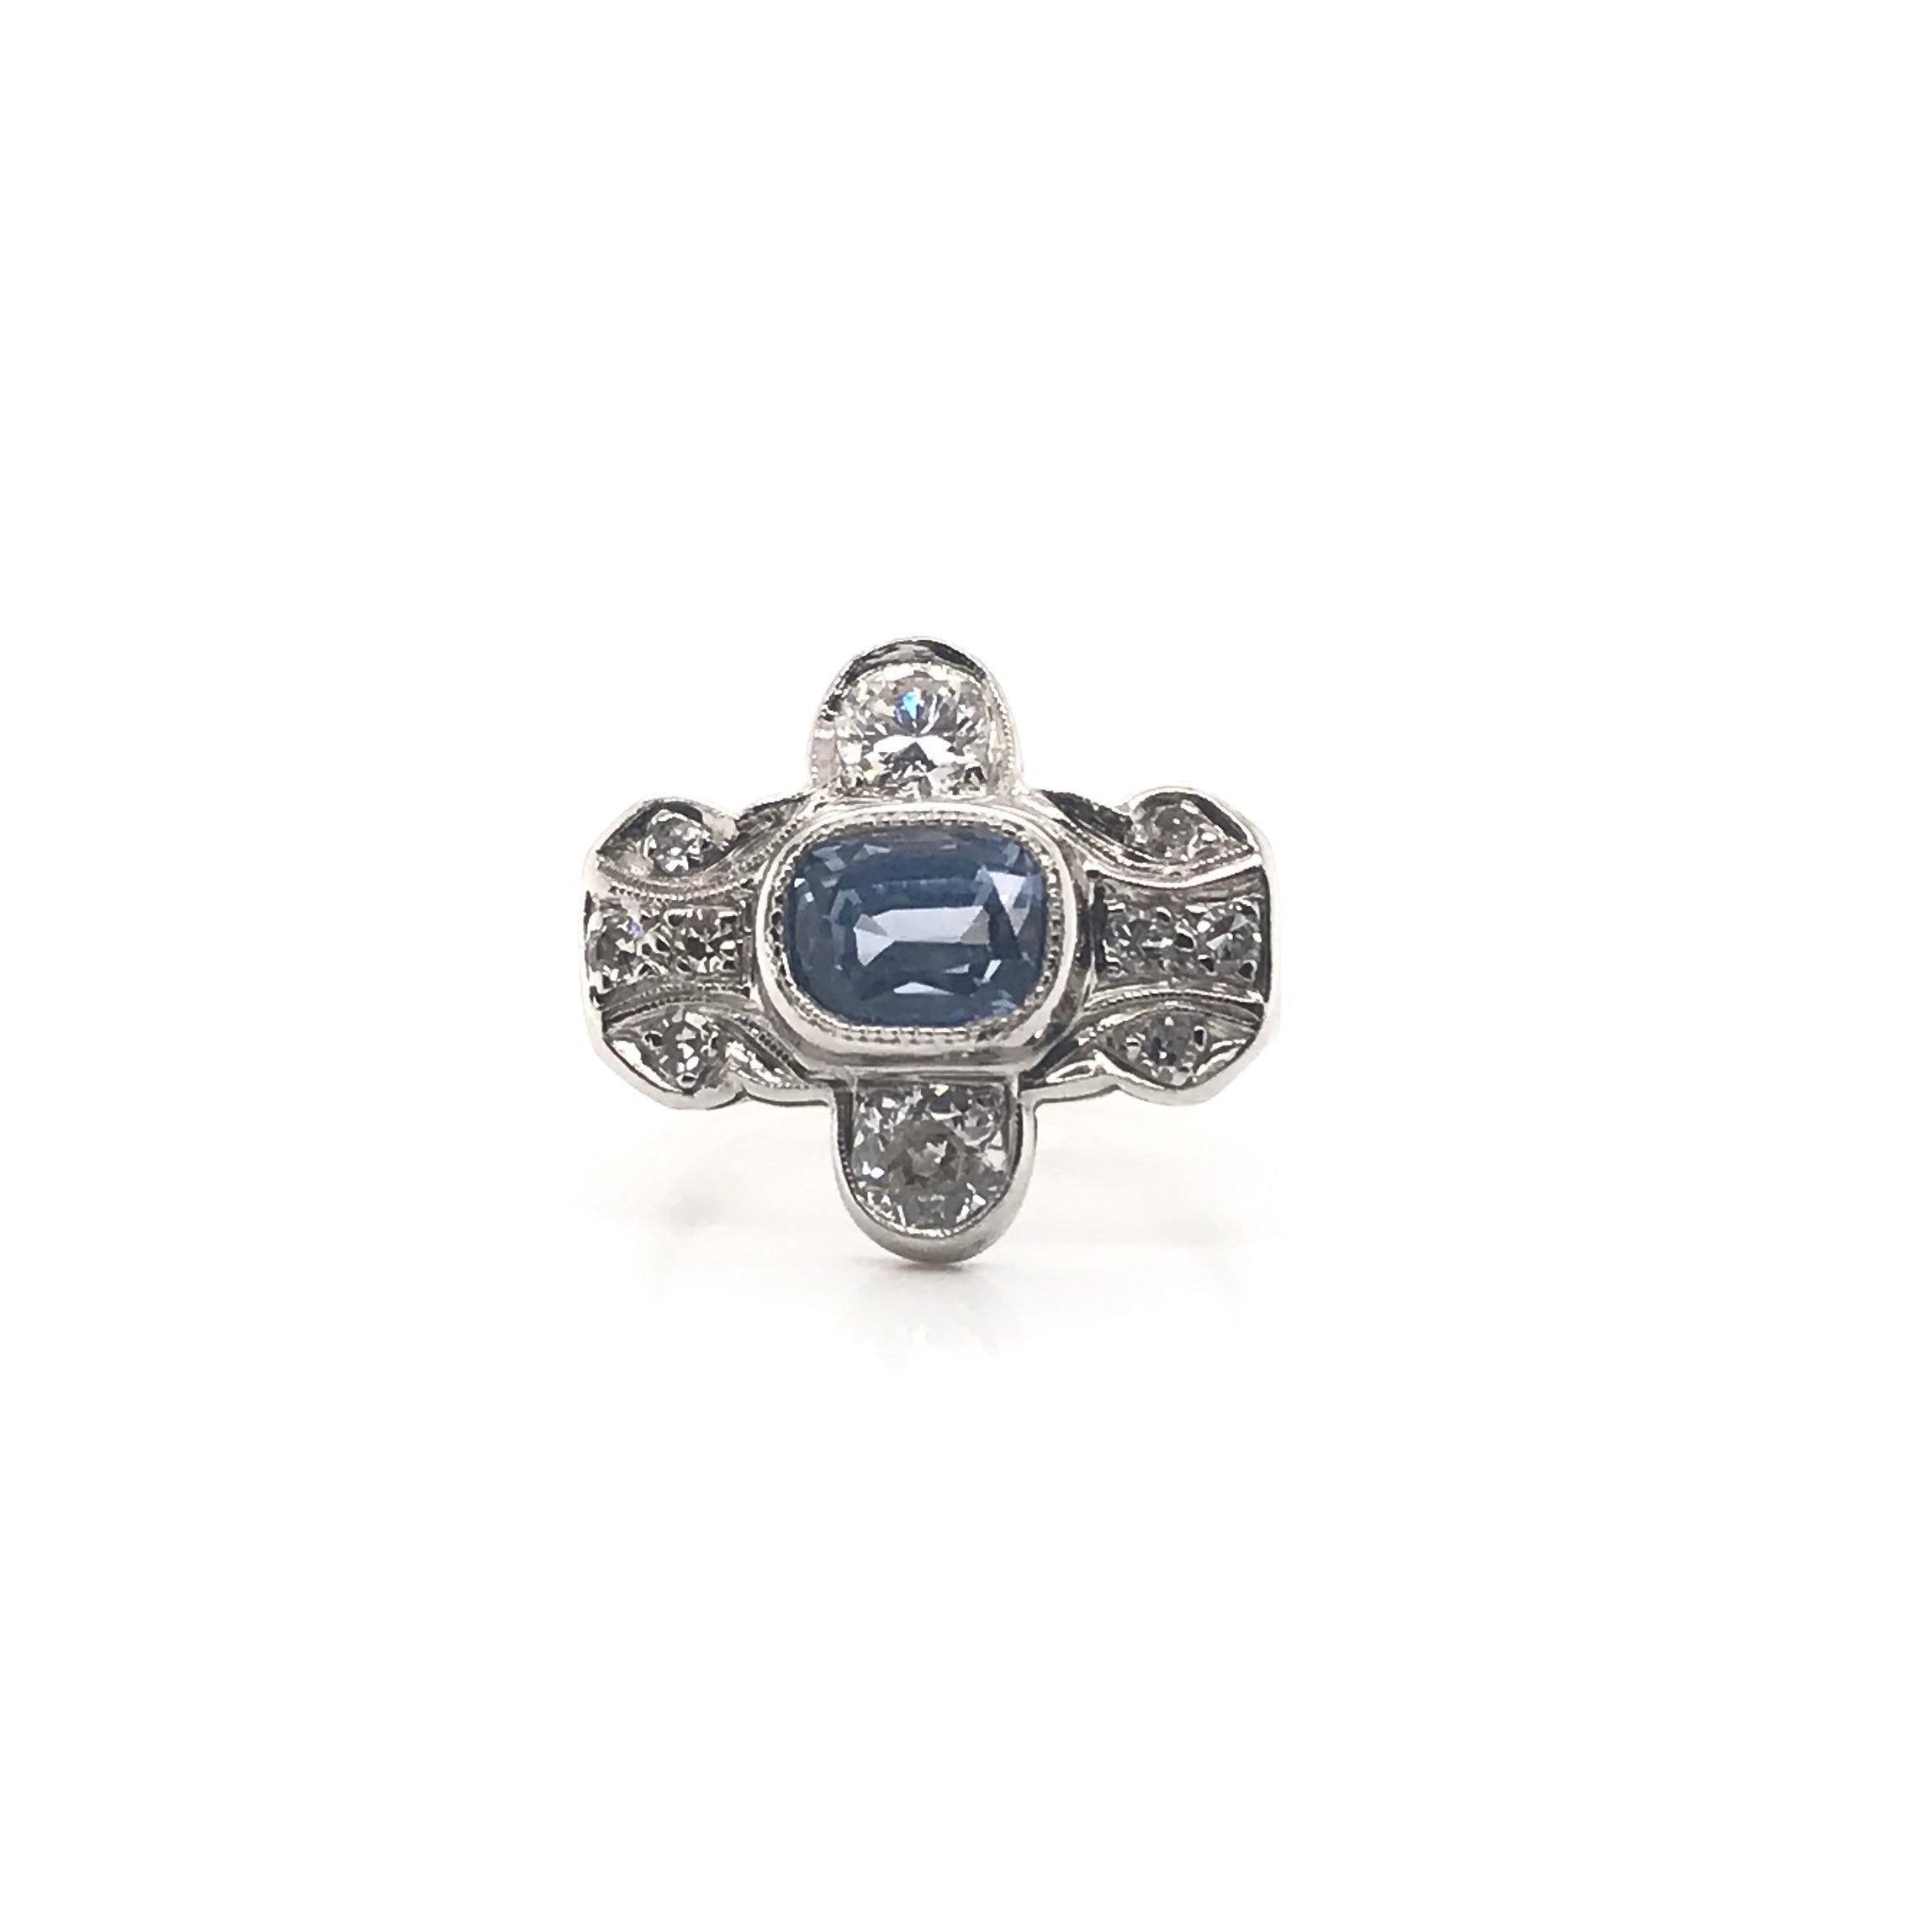 This unique antique piece was handcrafted sometime during the Art Deco design period ( 1920-1940 ). The center stone is a 1.95 carat Ceylon sapphire. Ceylon sapphires are exclusively sourced from the former Ceylon area, now Sri Lanka. Ceylon